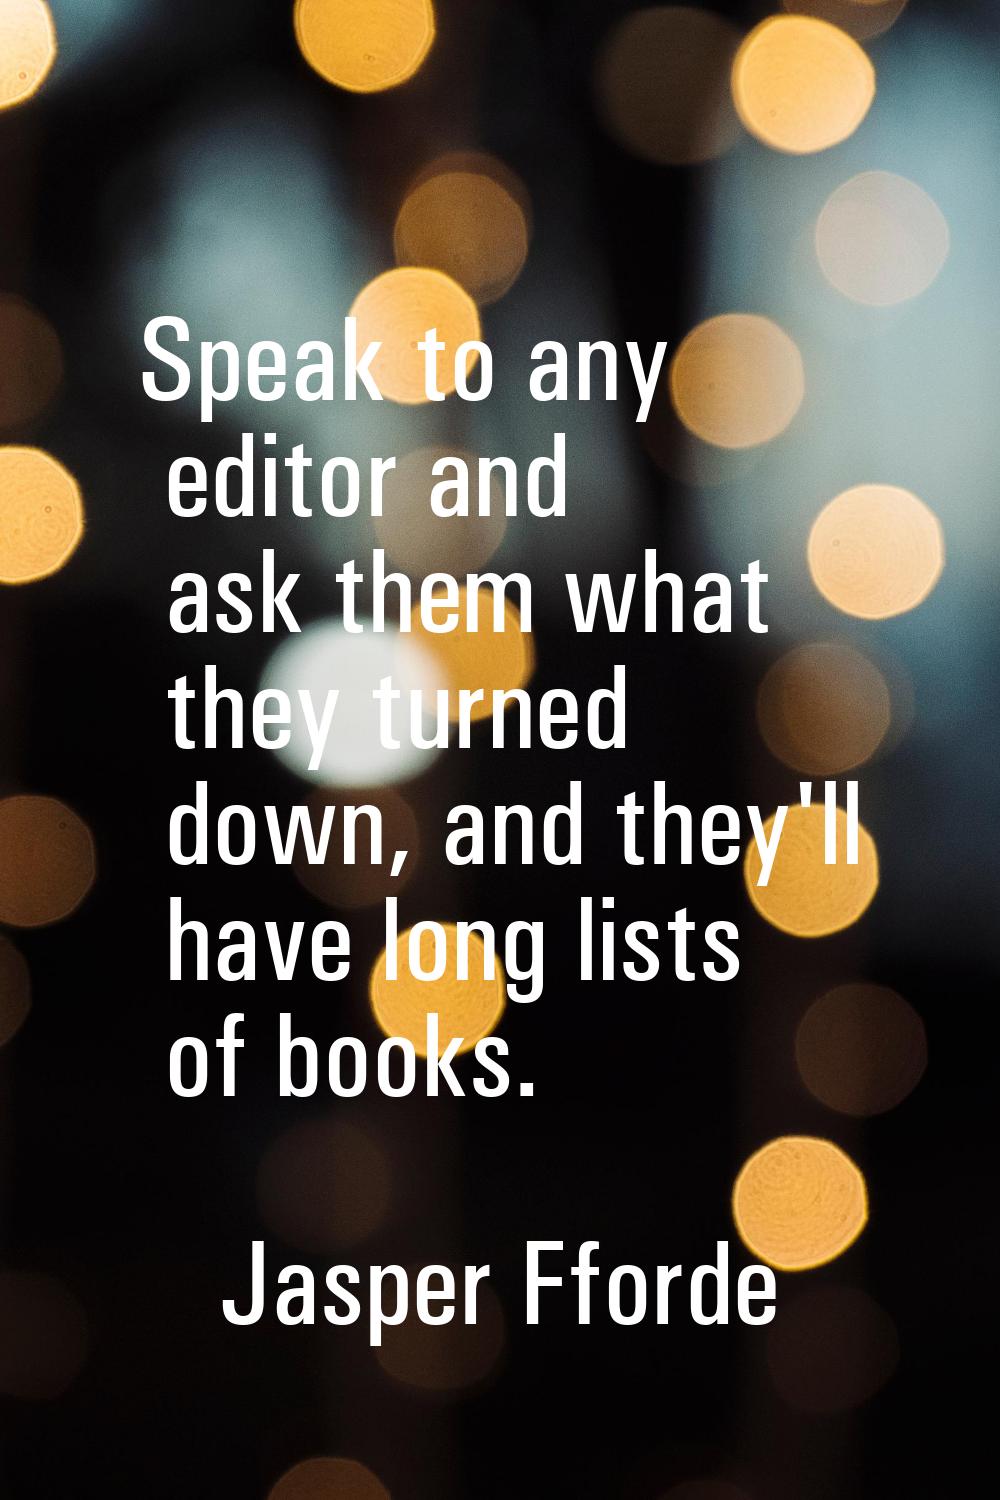 Speak to any editor and ask them what they turned down, and they'll have long lists of books.